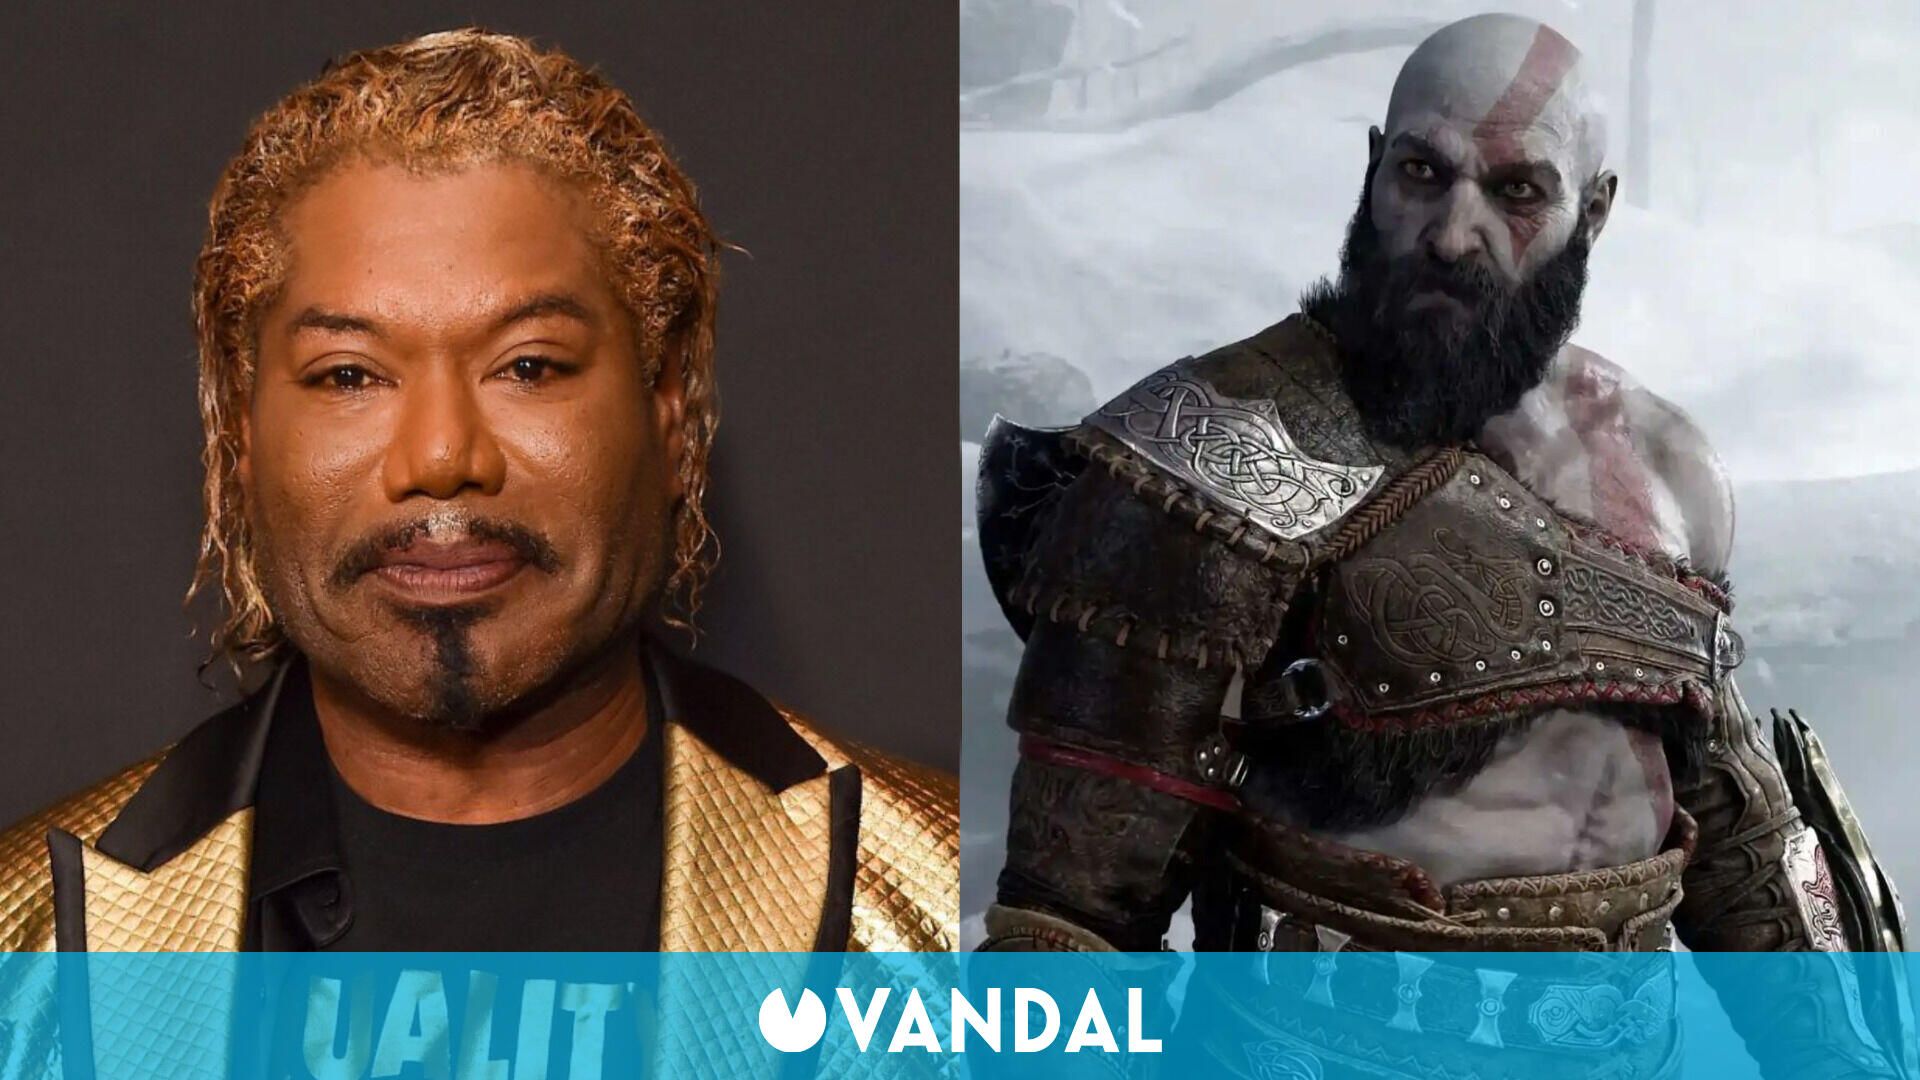 Christopher Judge, who plays Kratos in God of War, calls for an end to the console war